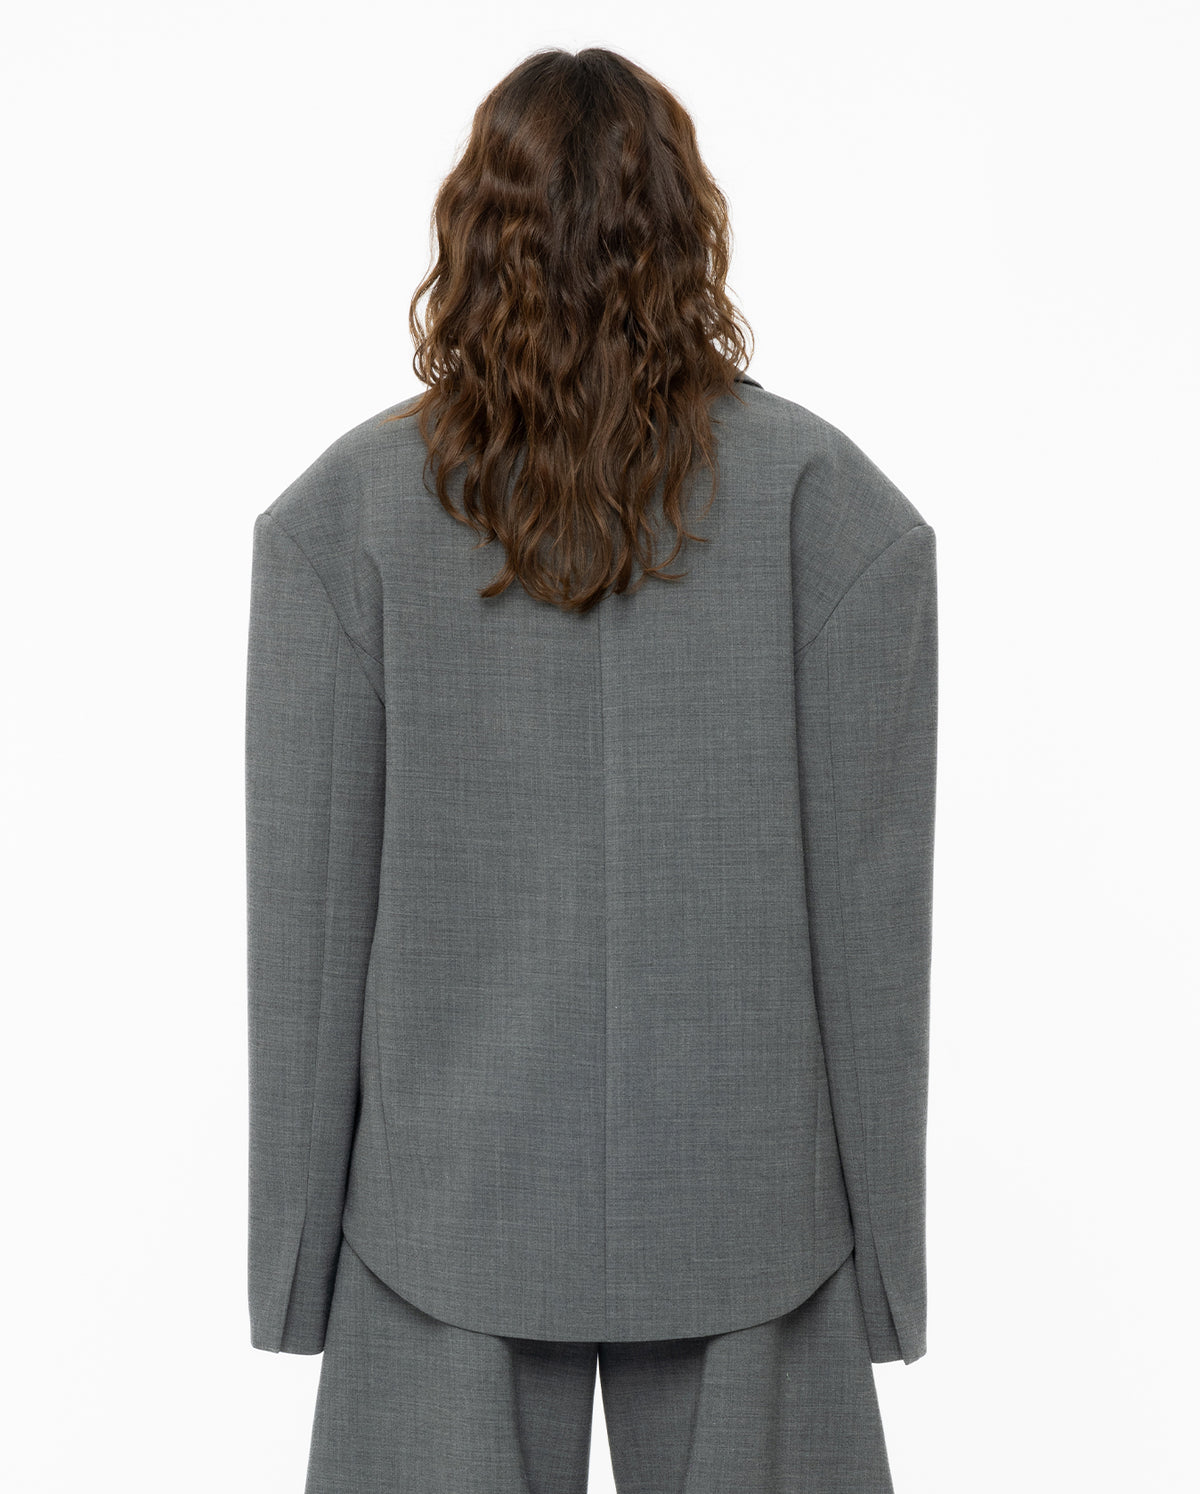 Oversized Curved Suit Jacket In Grey